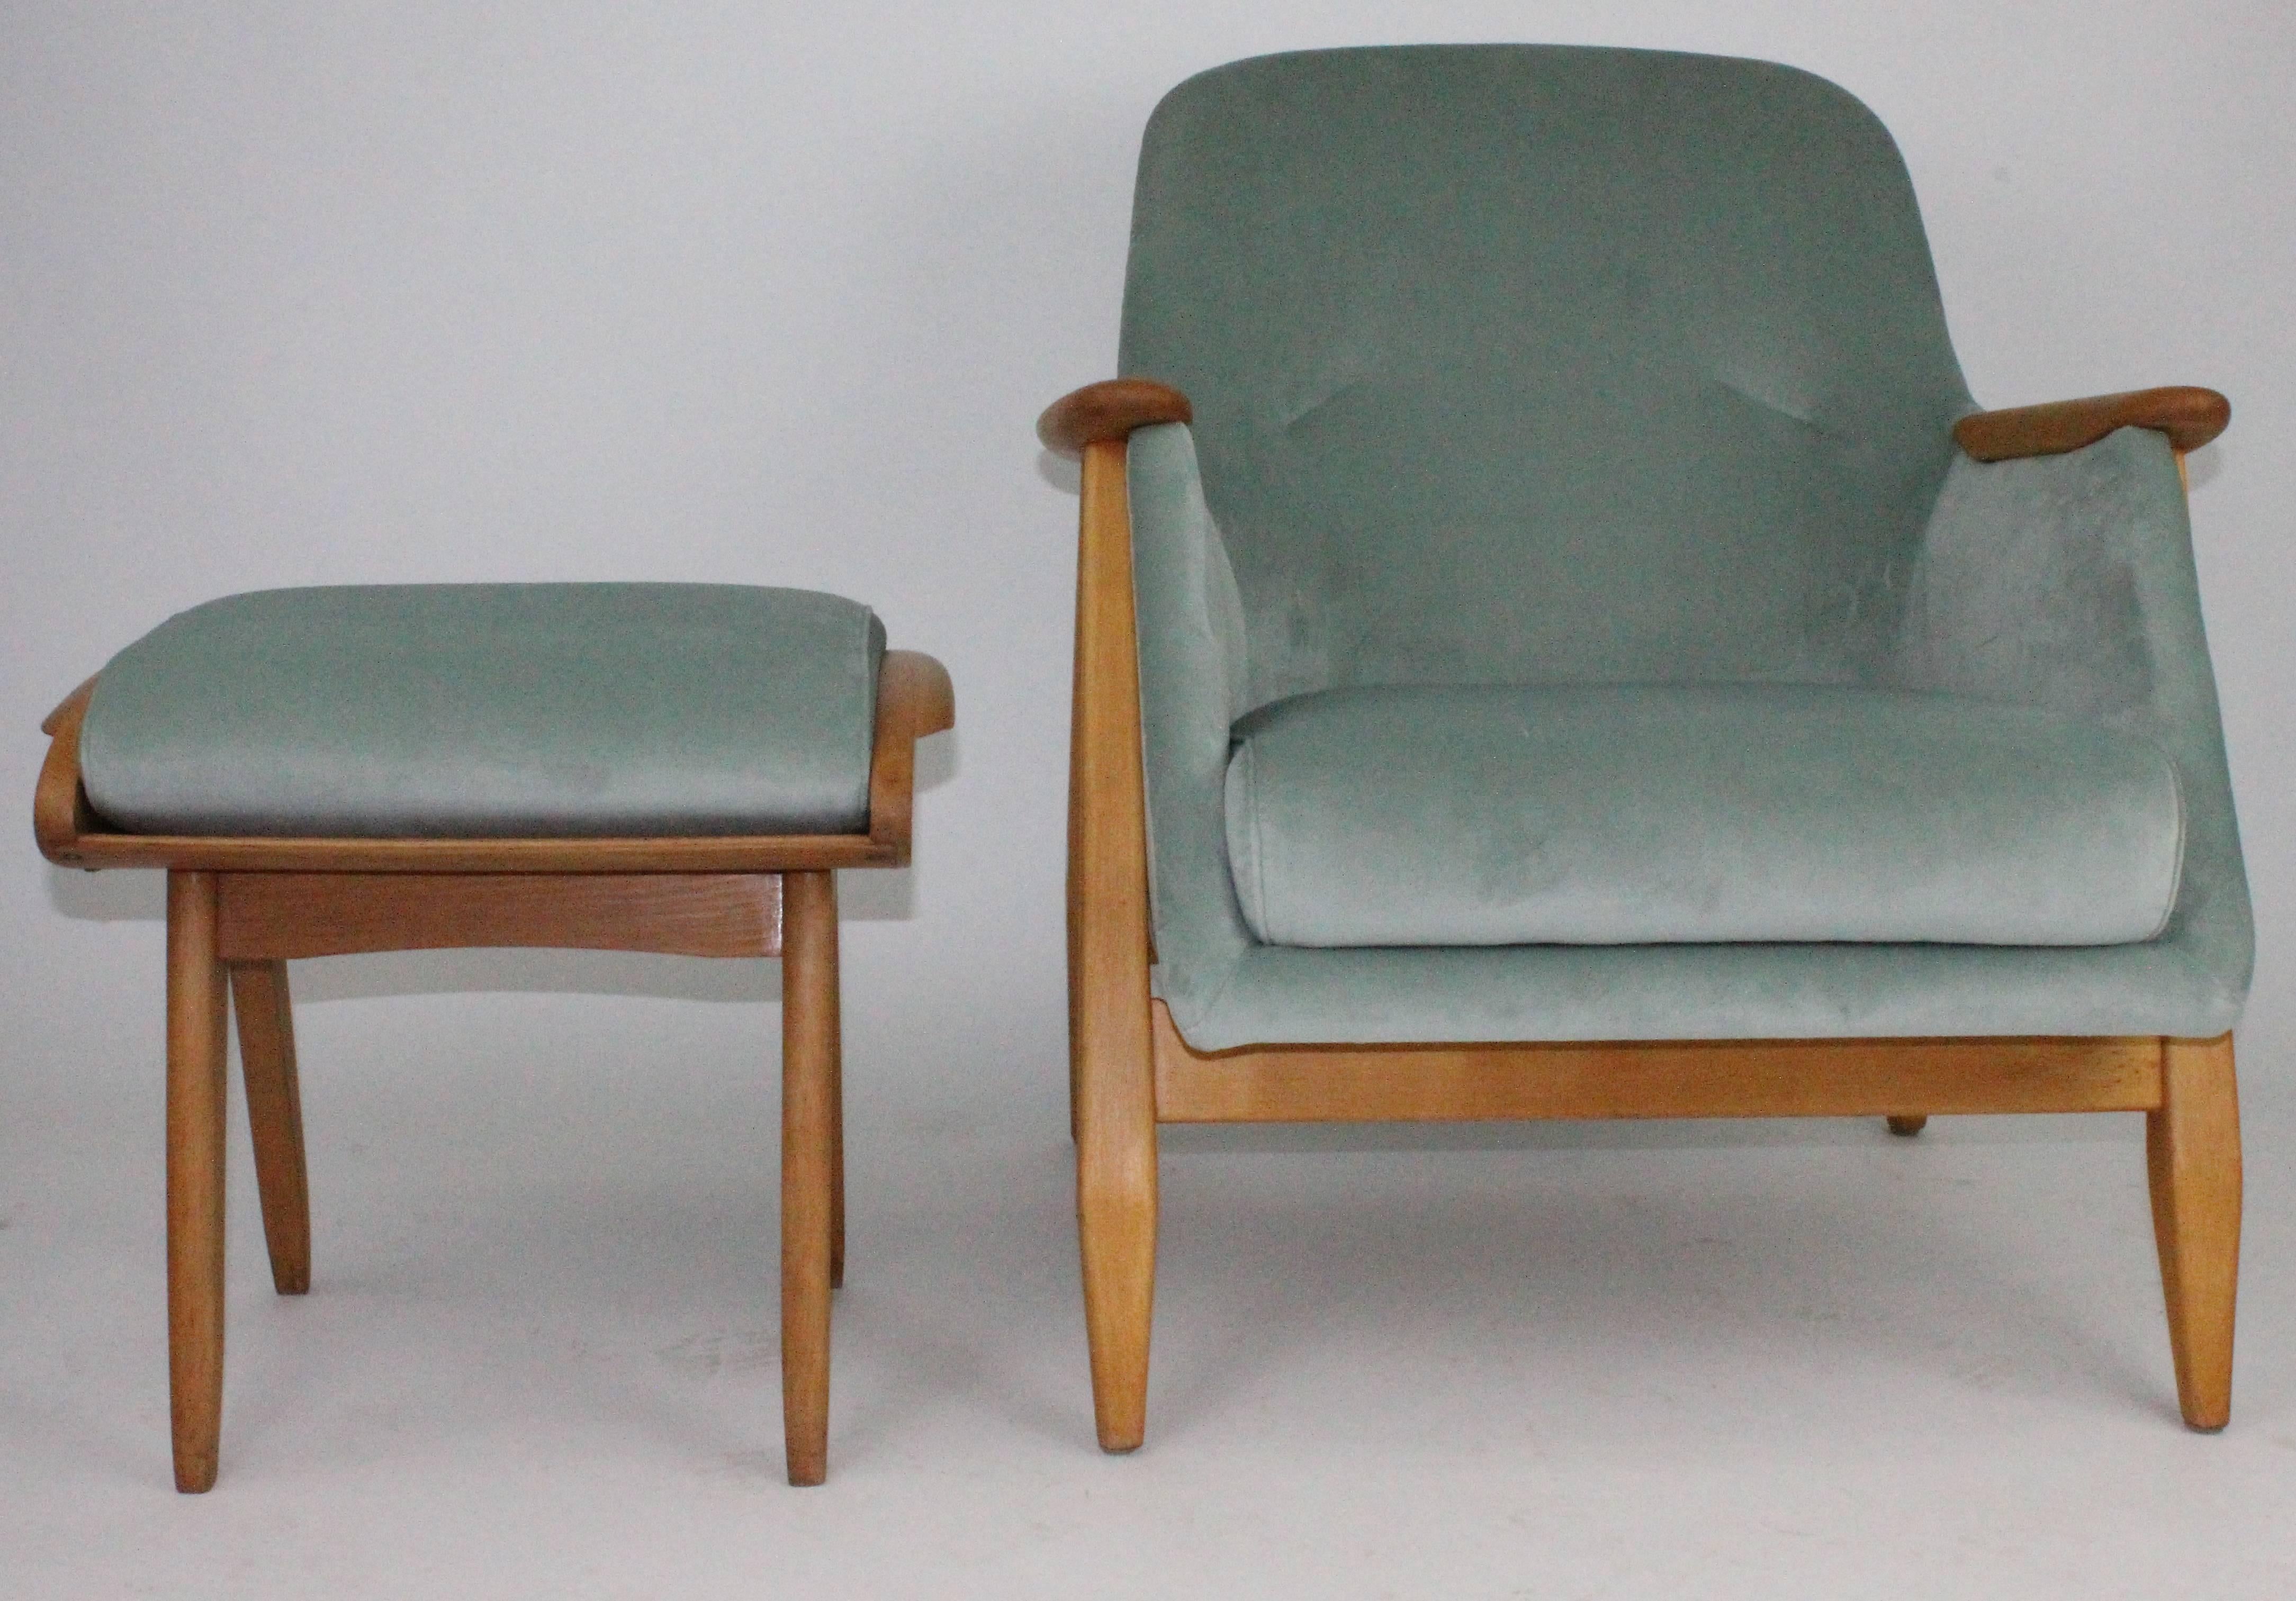 Svante Skogh Chair with Stool for Asko Finland, Design 1954 For Sale 2